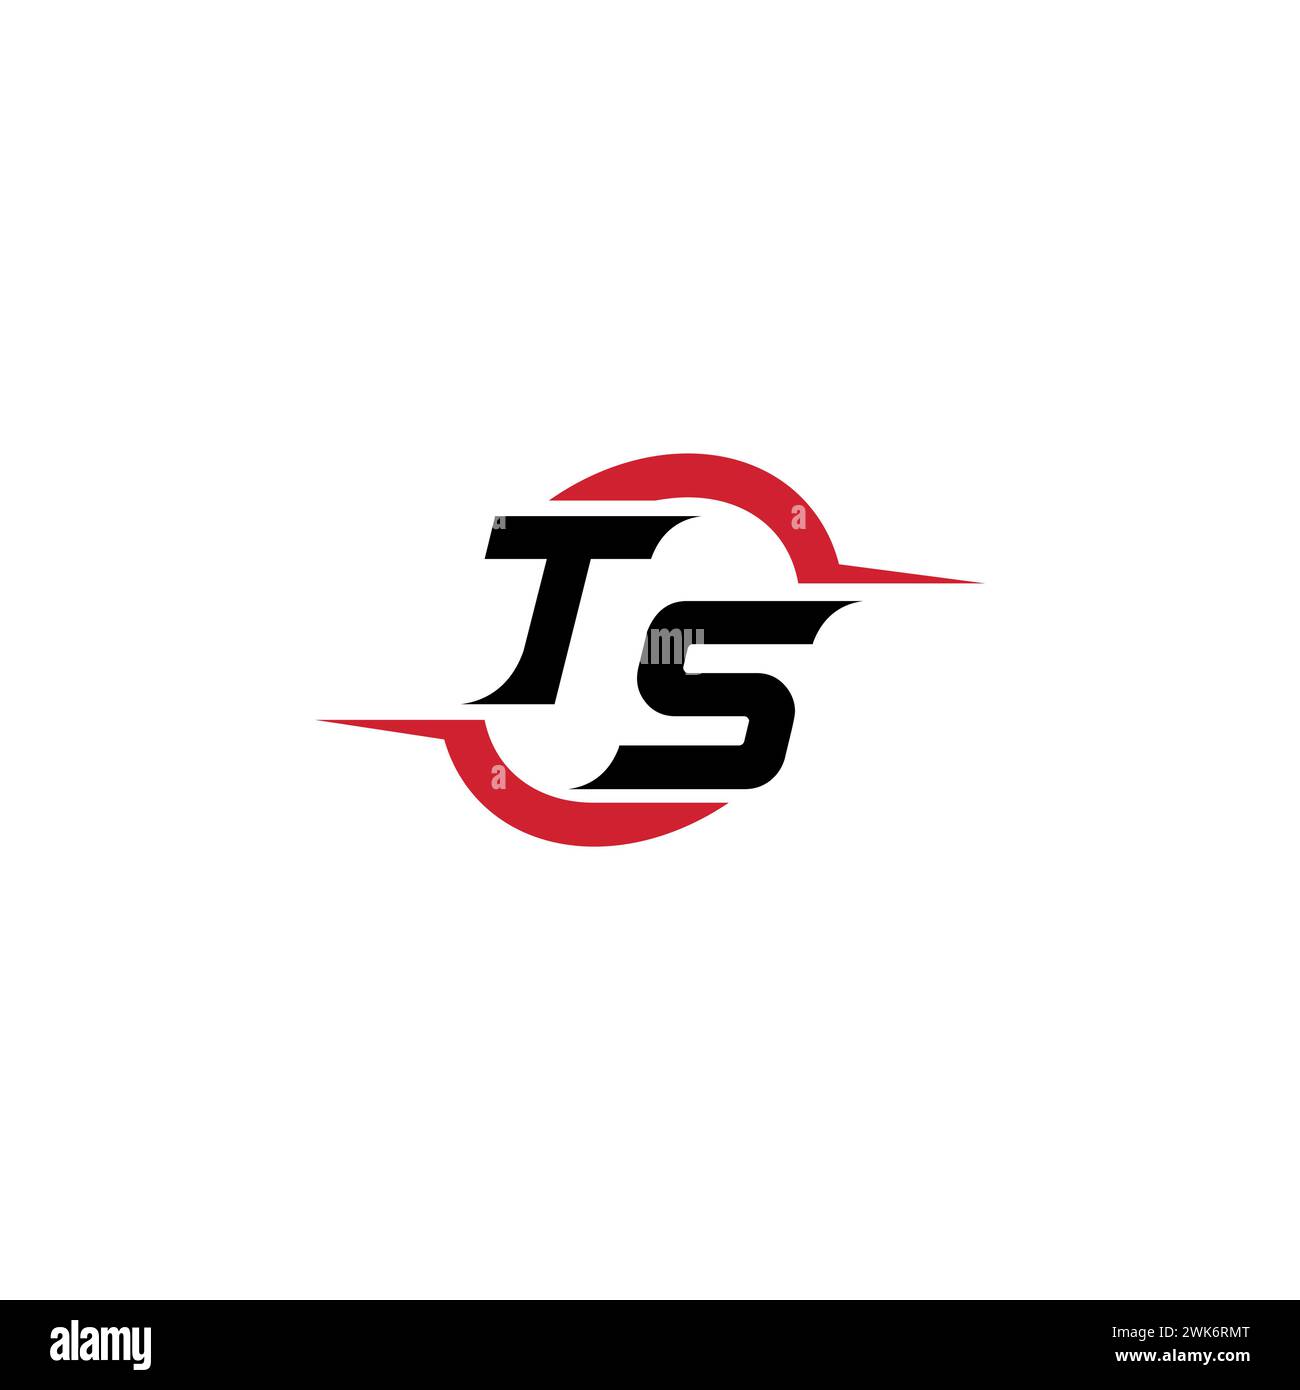 TS initial logo cool and stylish concept for esport or gaming logo as your inspirational Stock Vector